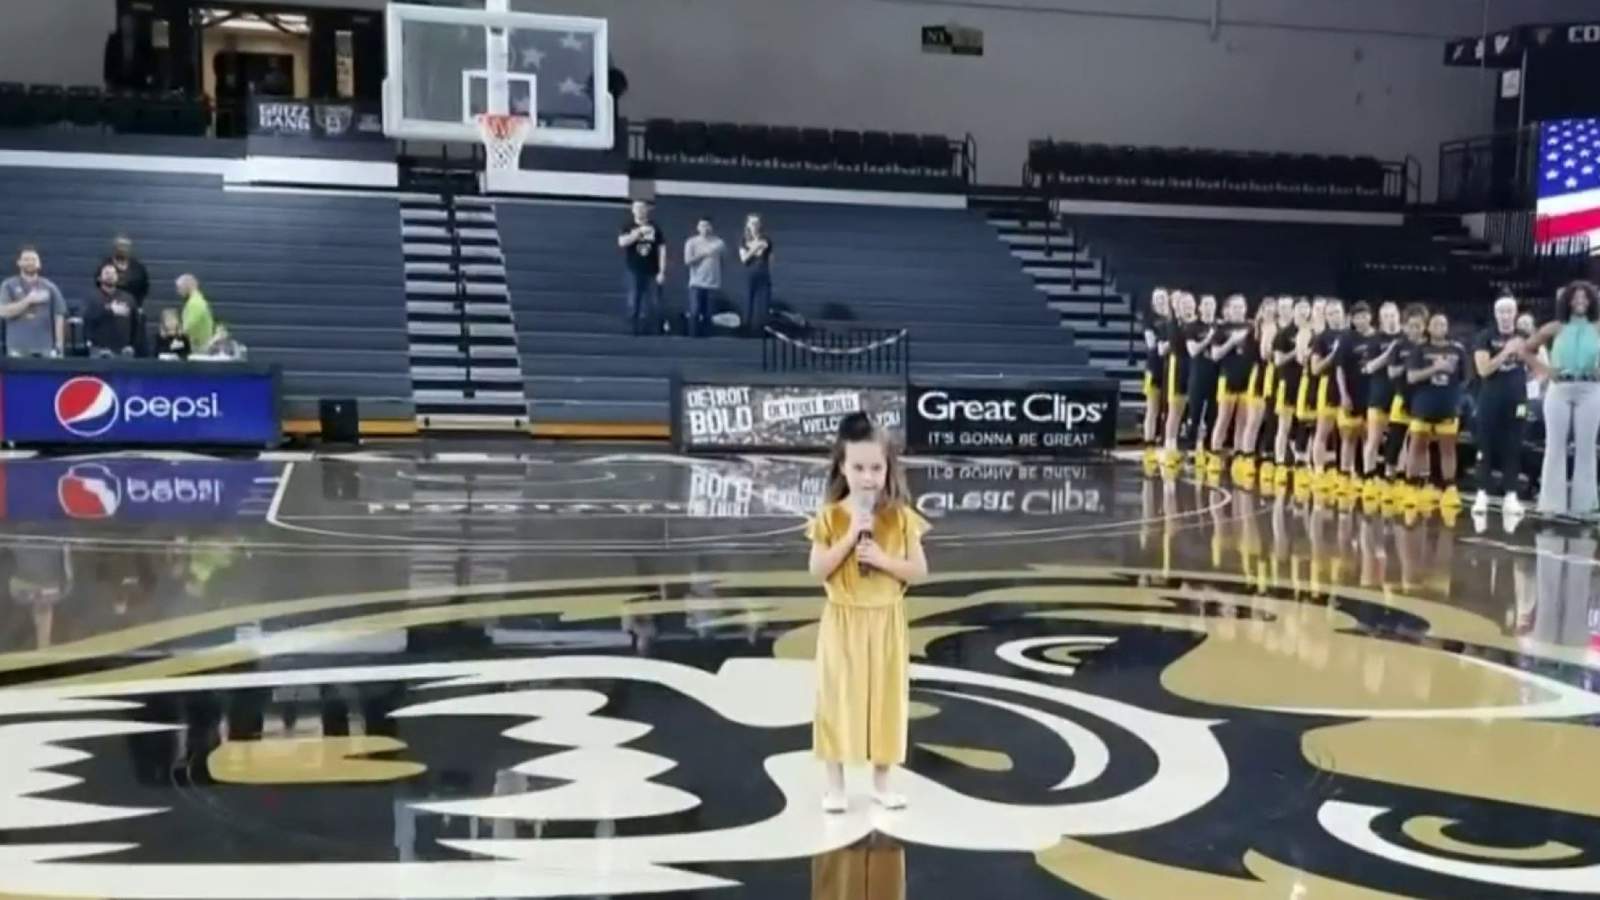 Young girl impresses audience at Oakland University basketball game with rendition of National Anthem